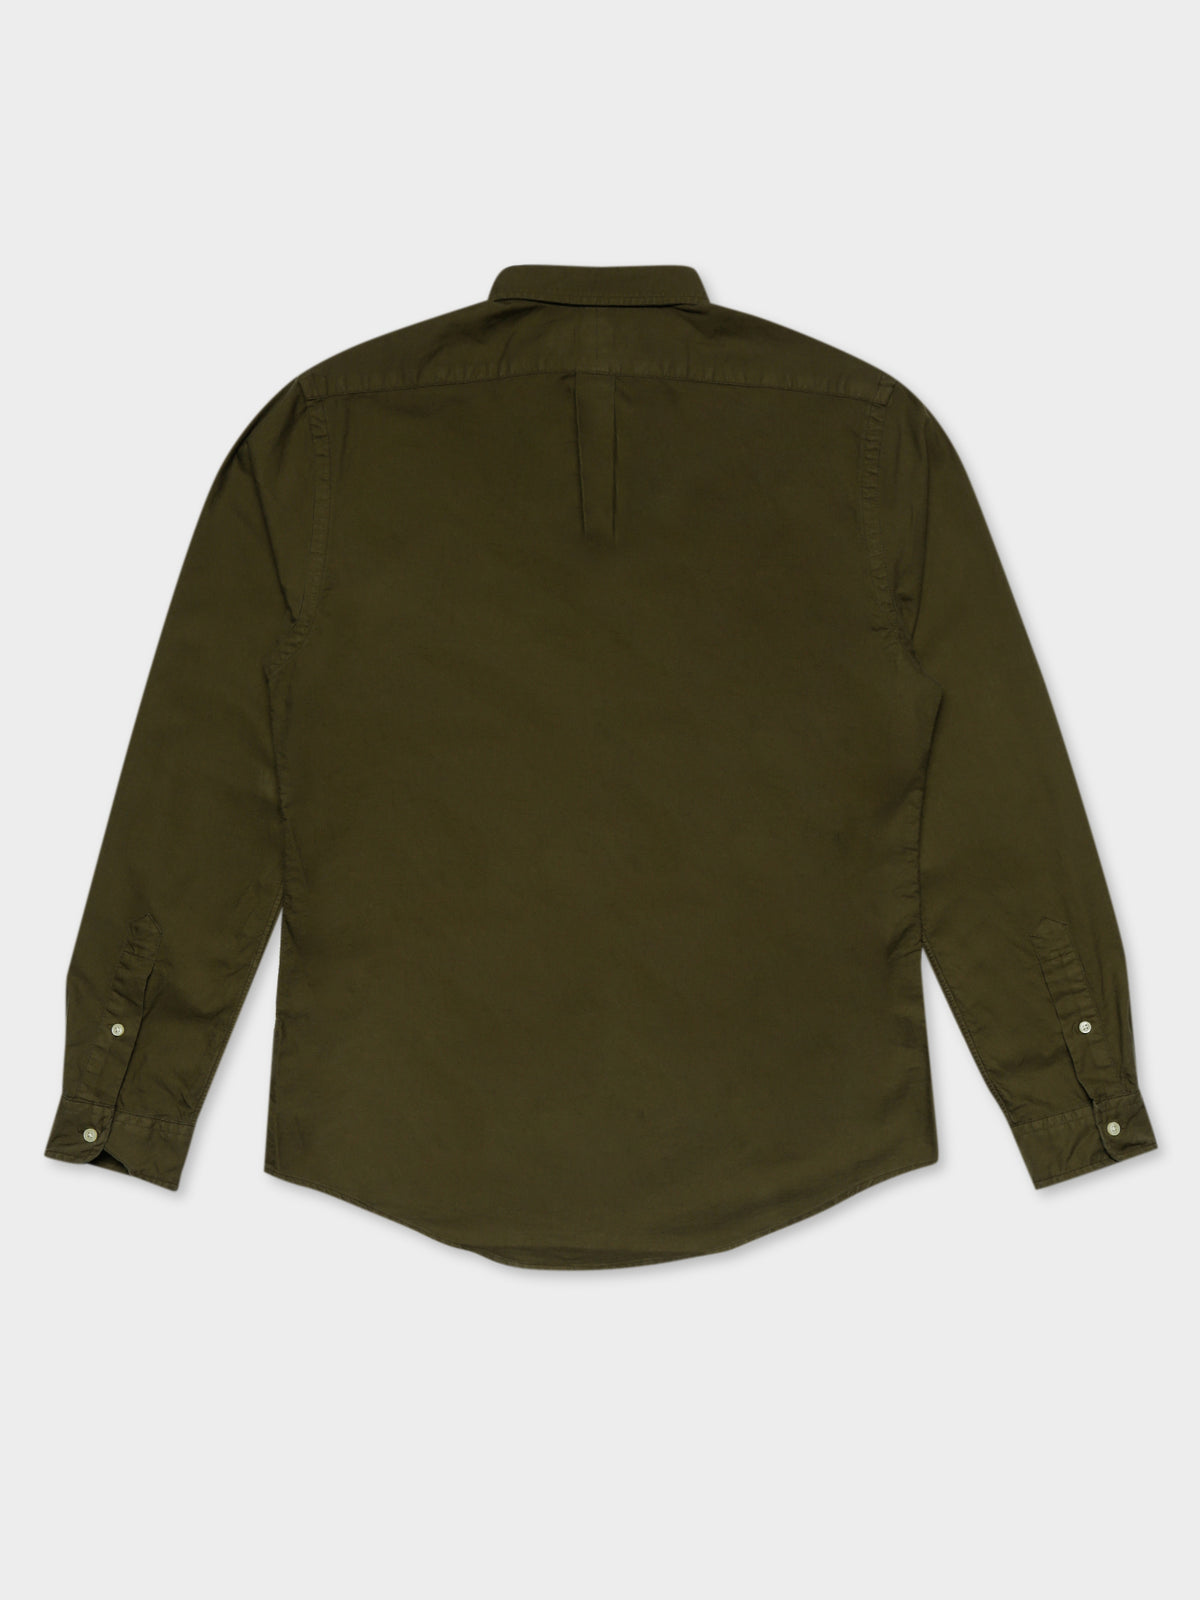 Logo Embroidered Long Sleeve Shirt in College Green